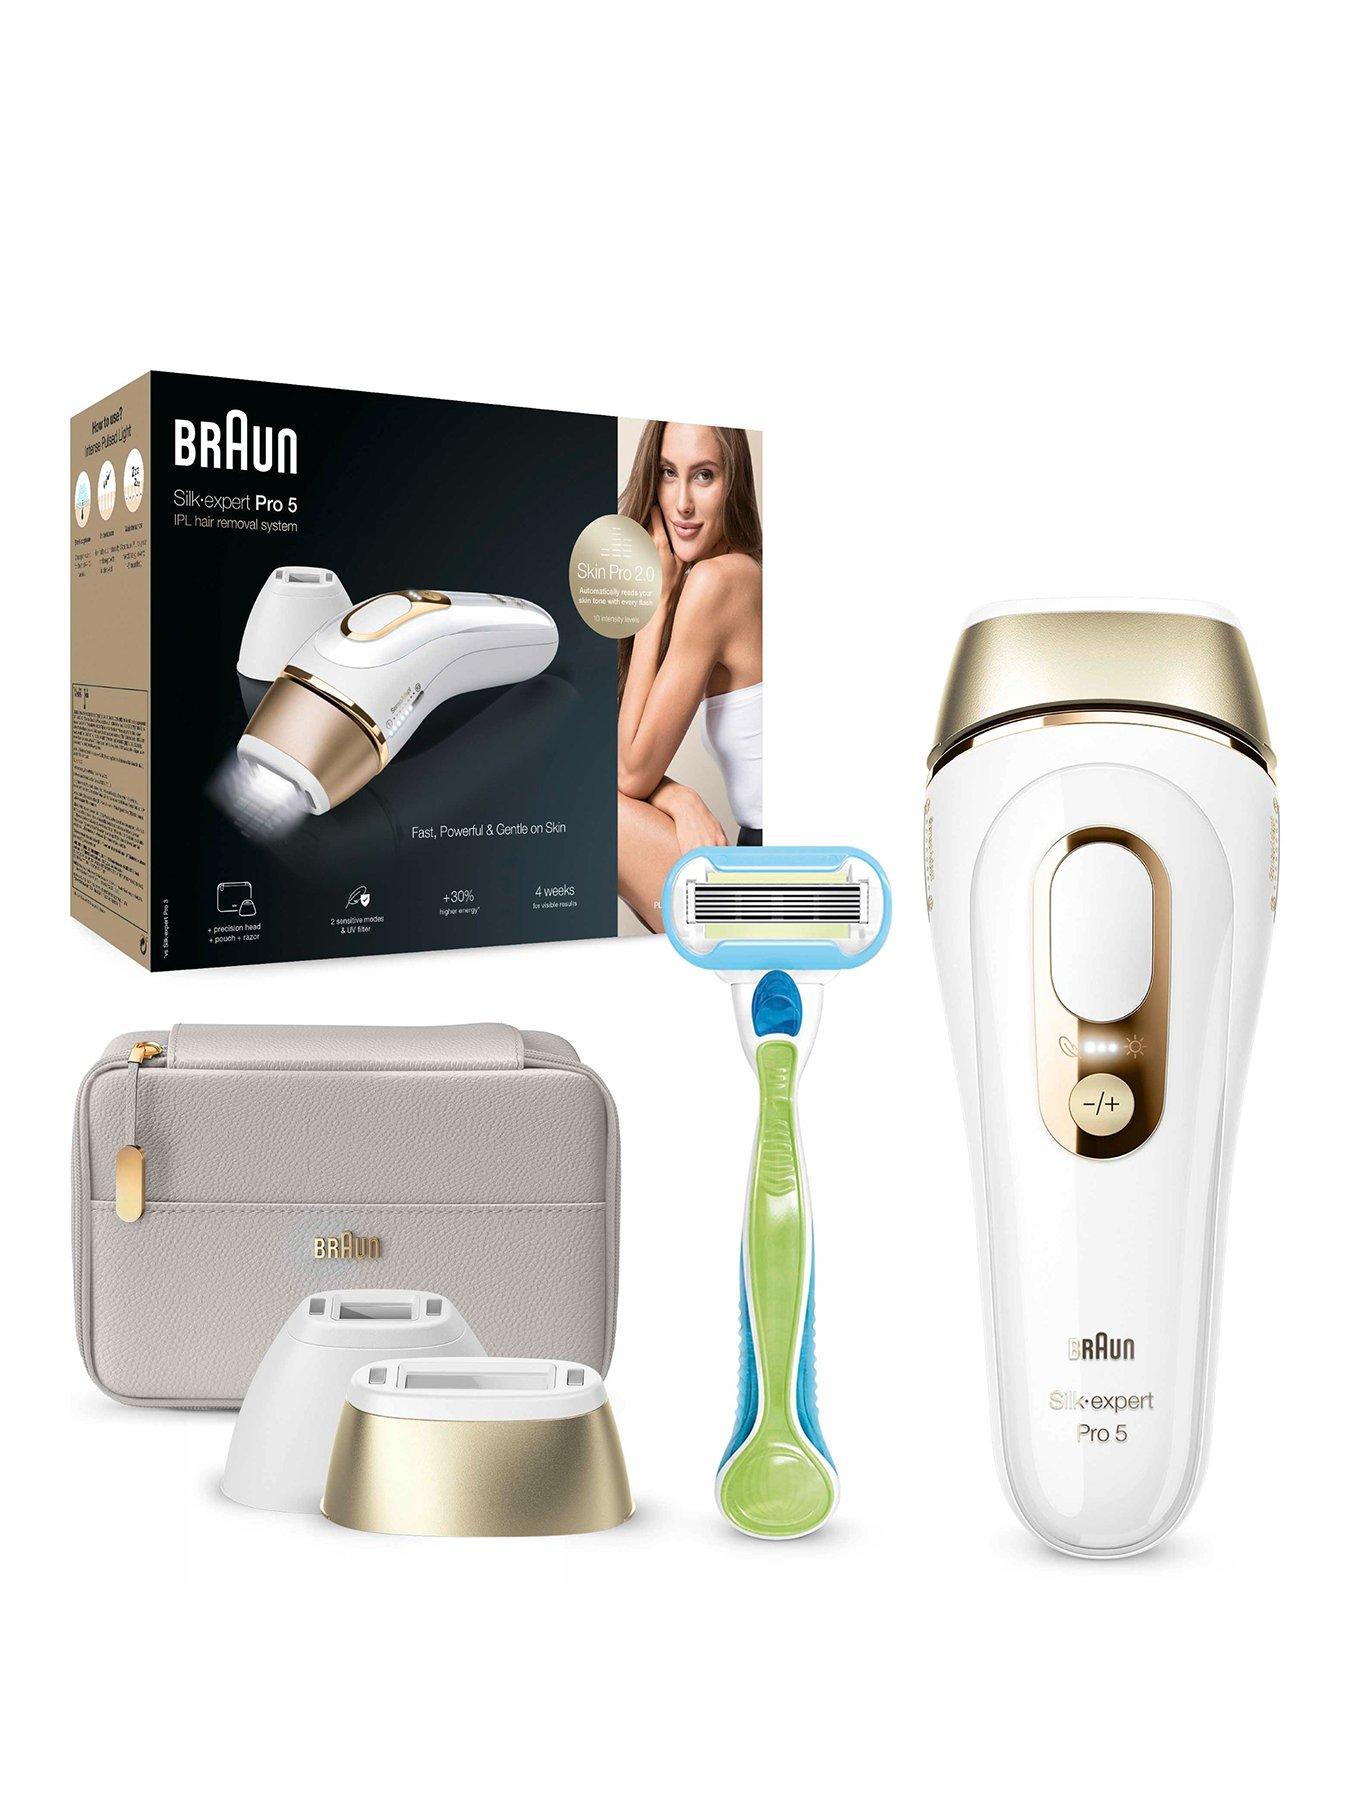 Braun IPL Silk-Expert Pro 5, At Home Hair Removal With Pouch And